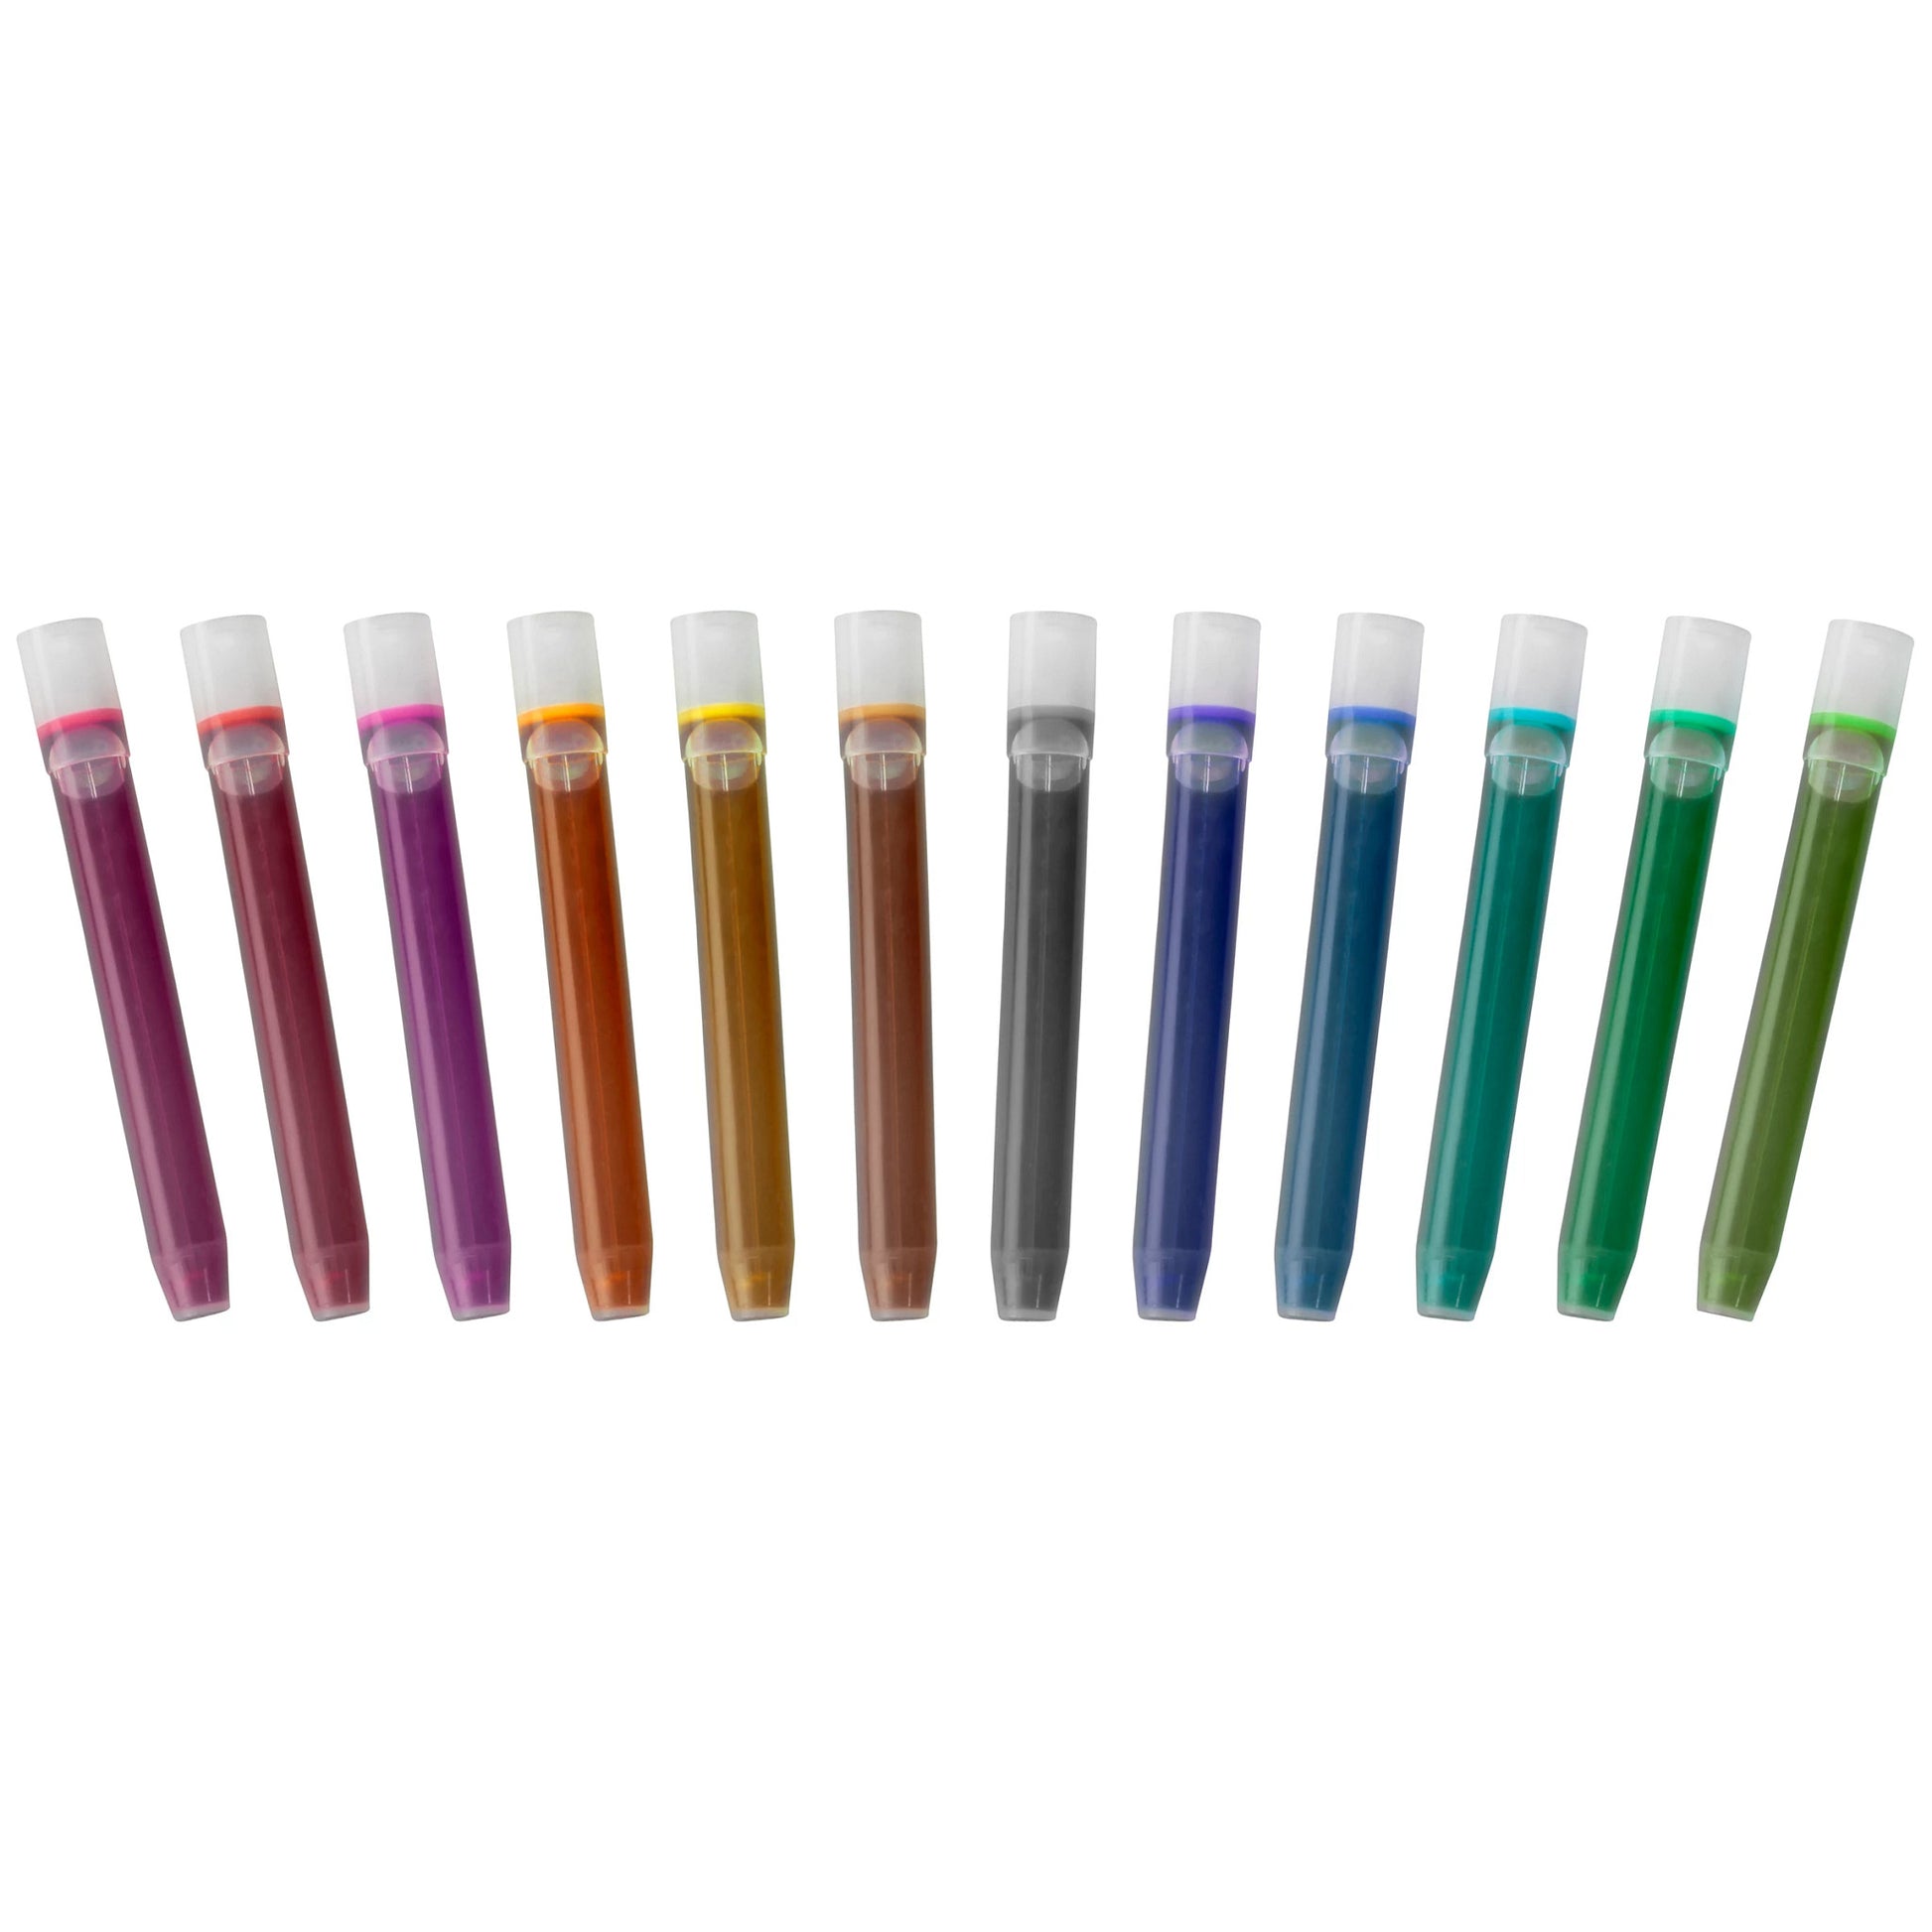 PILOT Parallel Mixable Color Ink Refills for Calligraphy Pens 12 Colors!